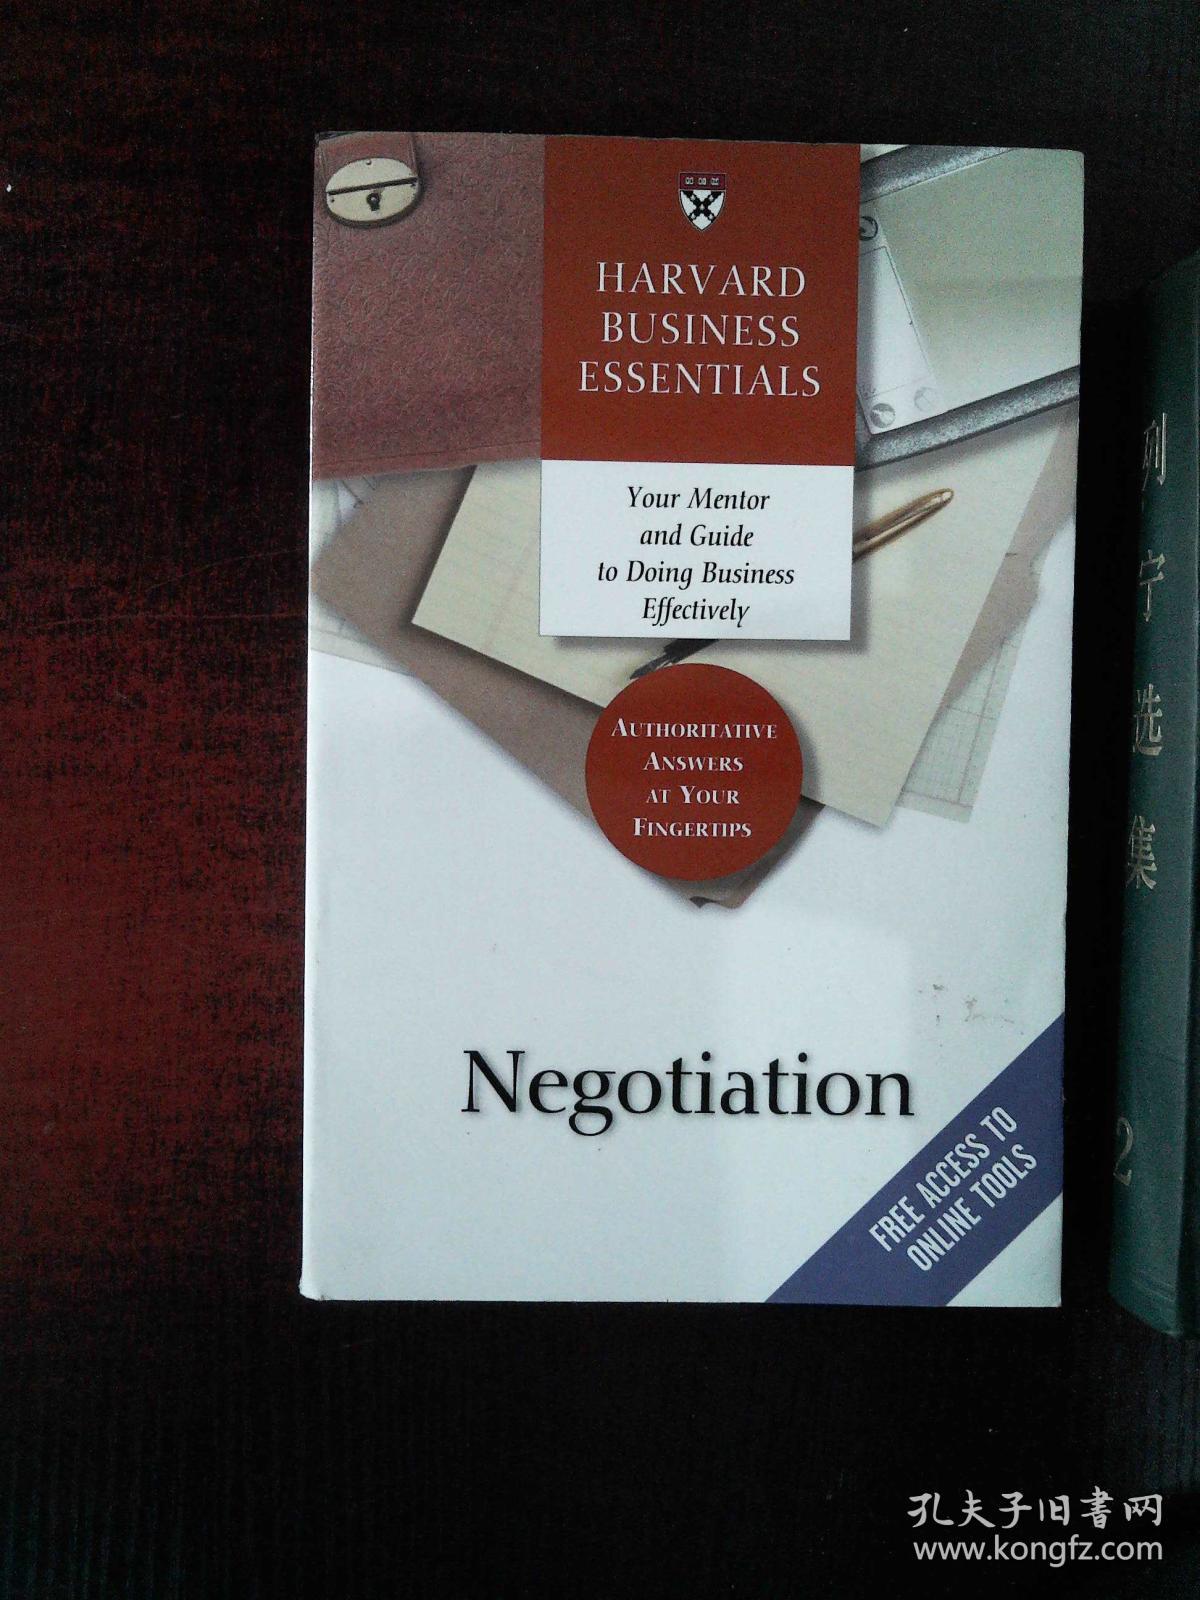 HARVARD BUSINESS ESSENTIALS NEGOTIATION：Your Mentor and to Effectively_孔夫子旧书网